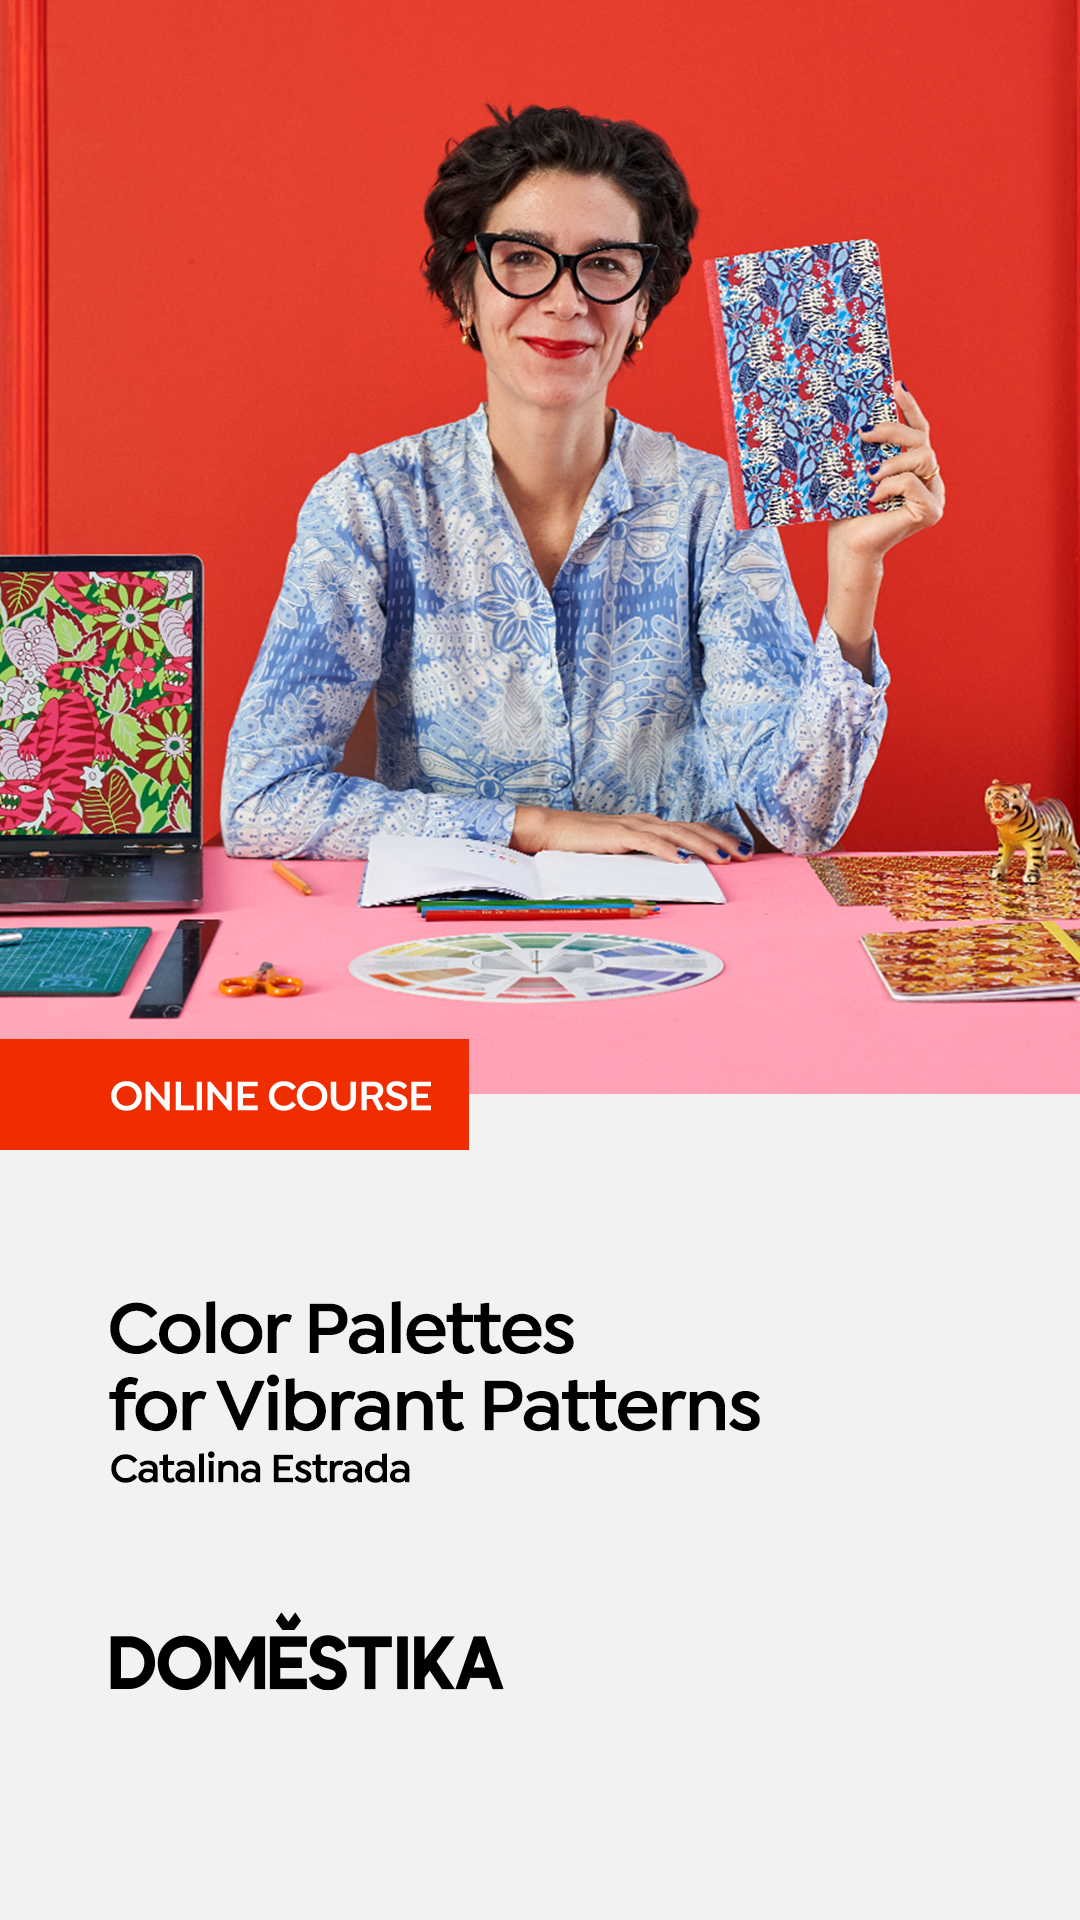 Color Palettes for Vibrant Patterns - Domestika Course by Catalina Estrada